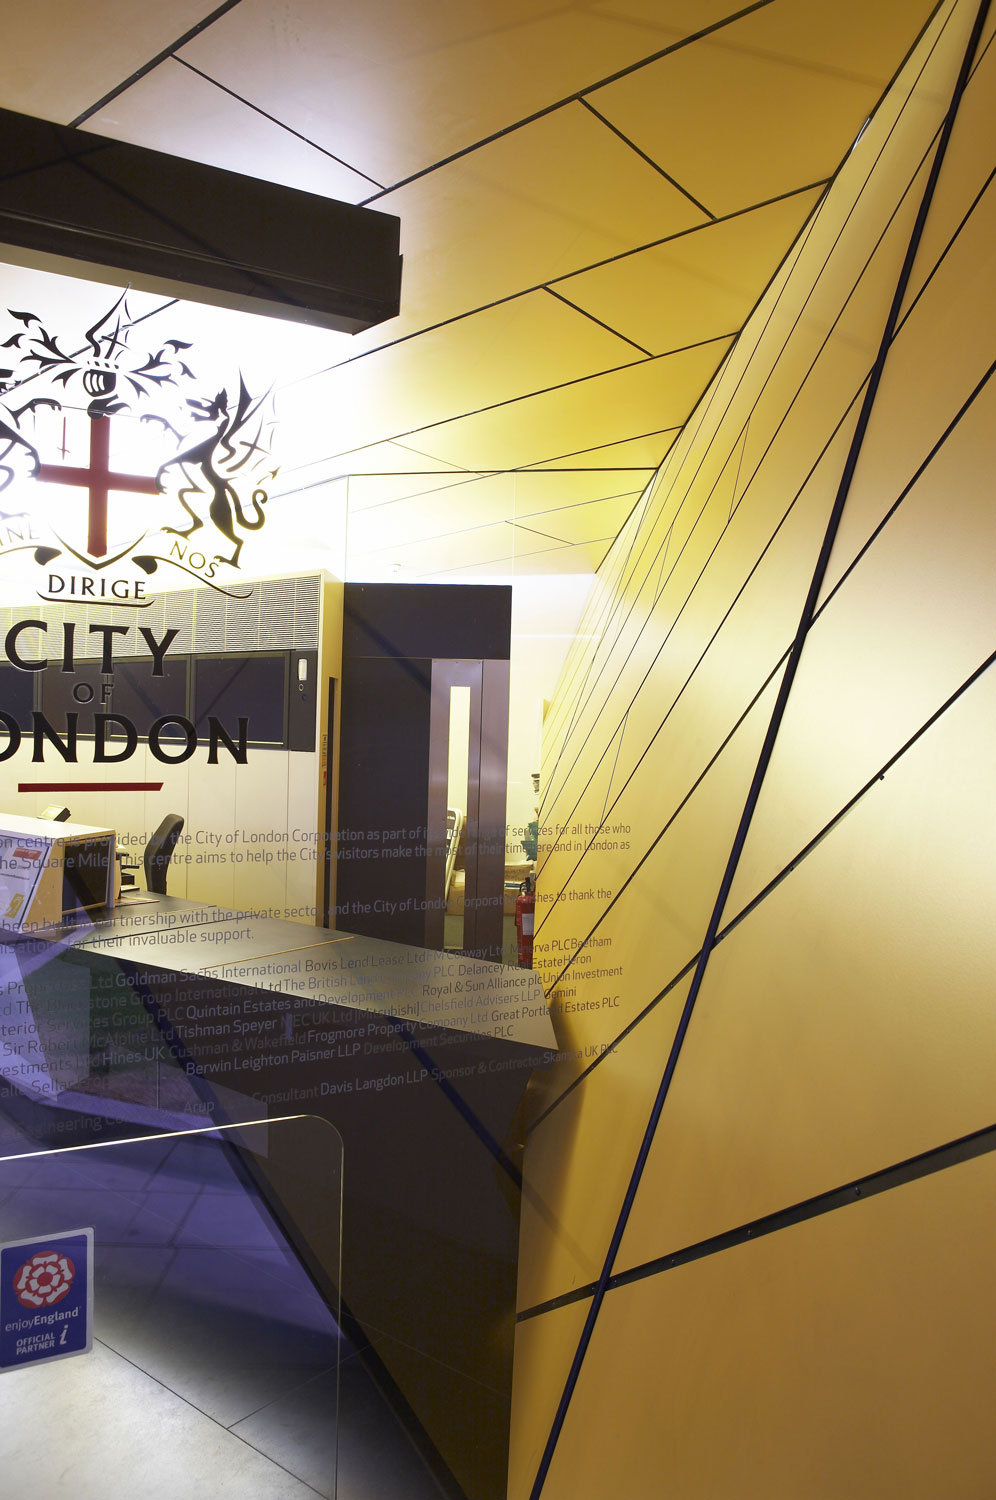 City of London Information Centre | Architectural Building Photographer